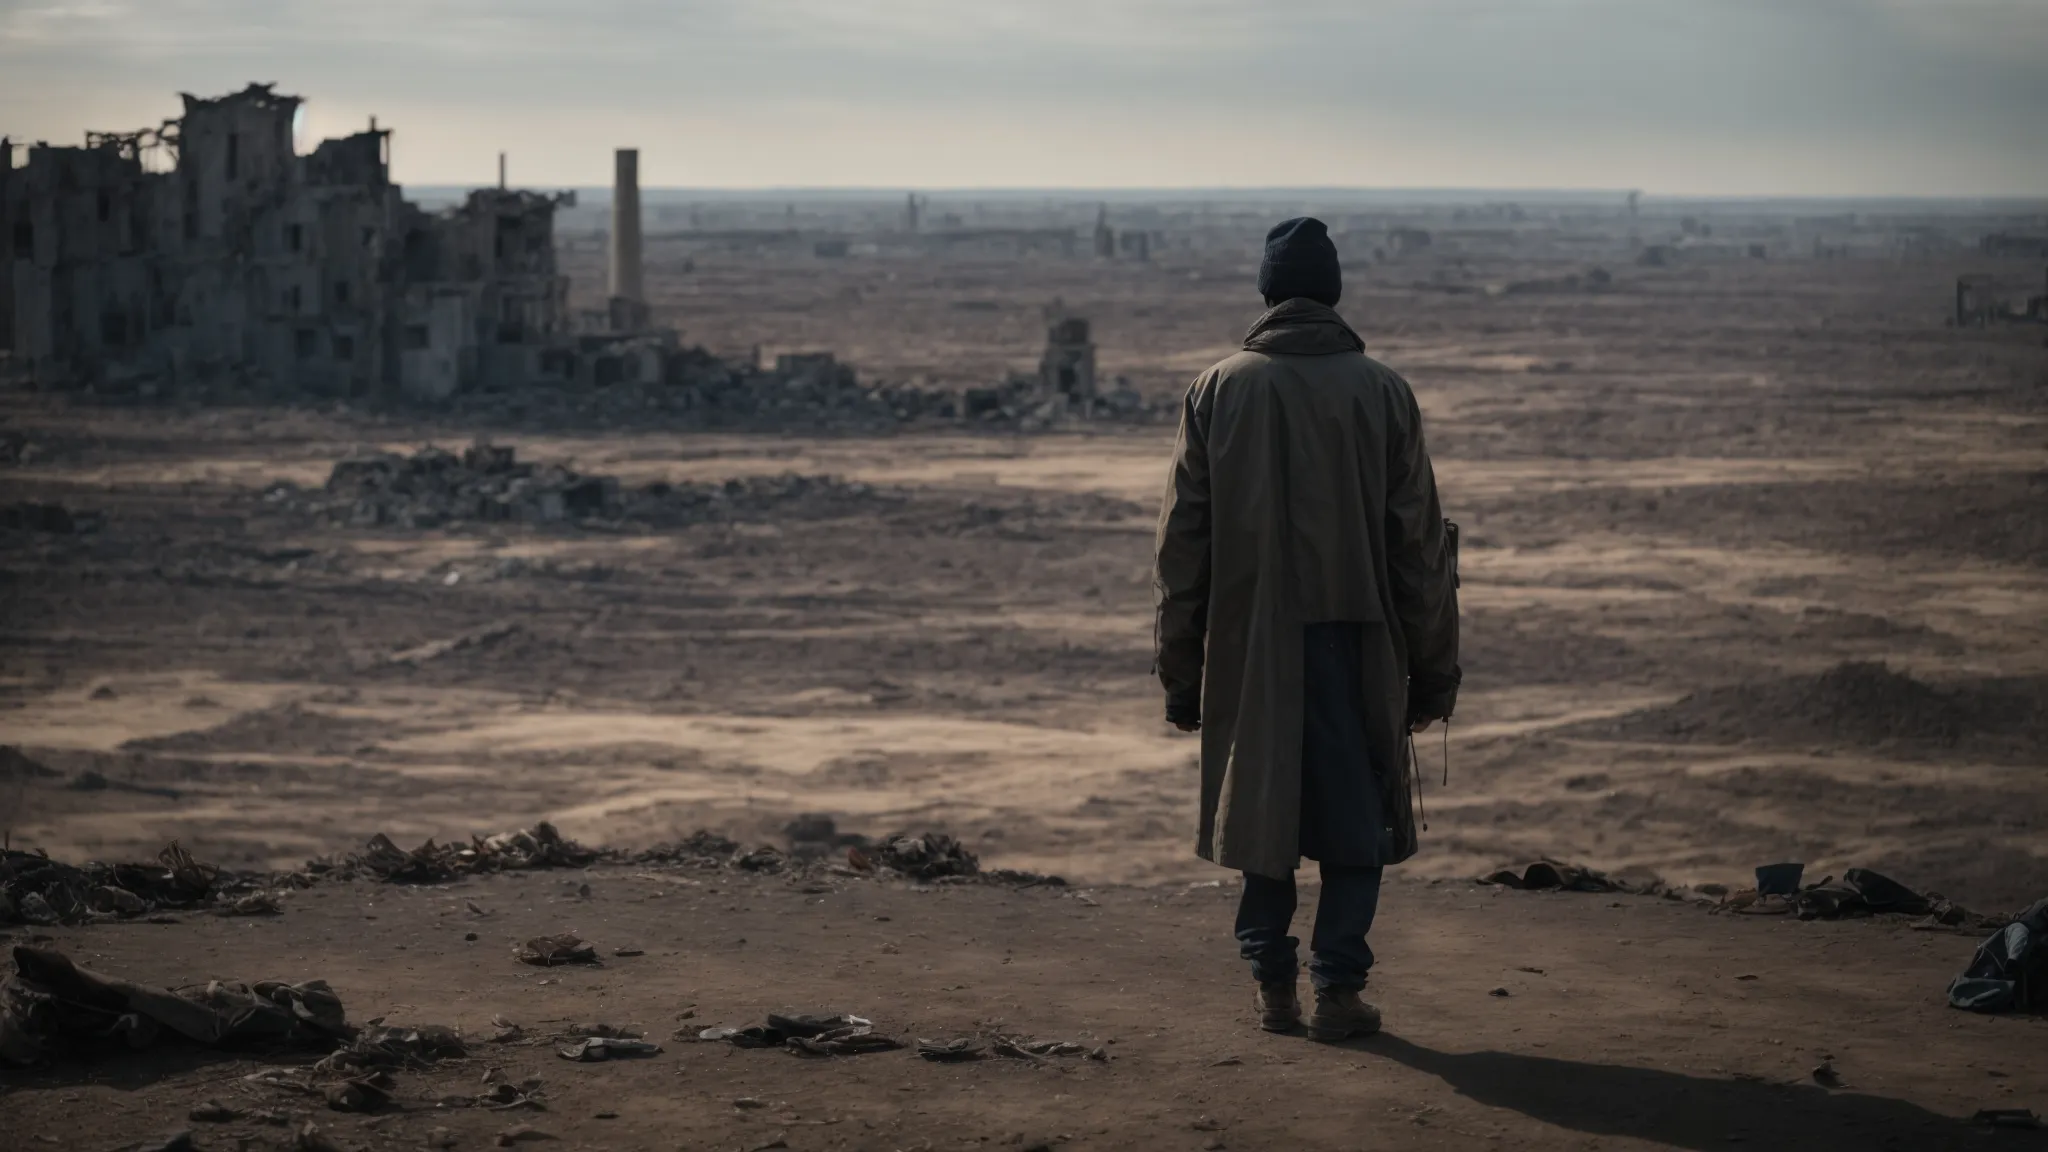 a lone figure in tattered clothing stands before a sprawling, desolate wasteland, with the shadowy ruins of a city on the horizon.